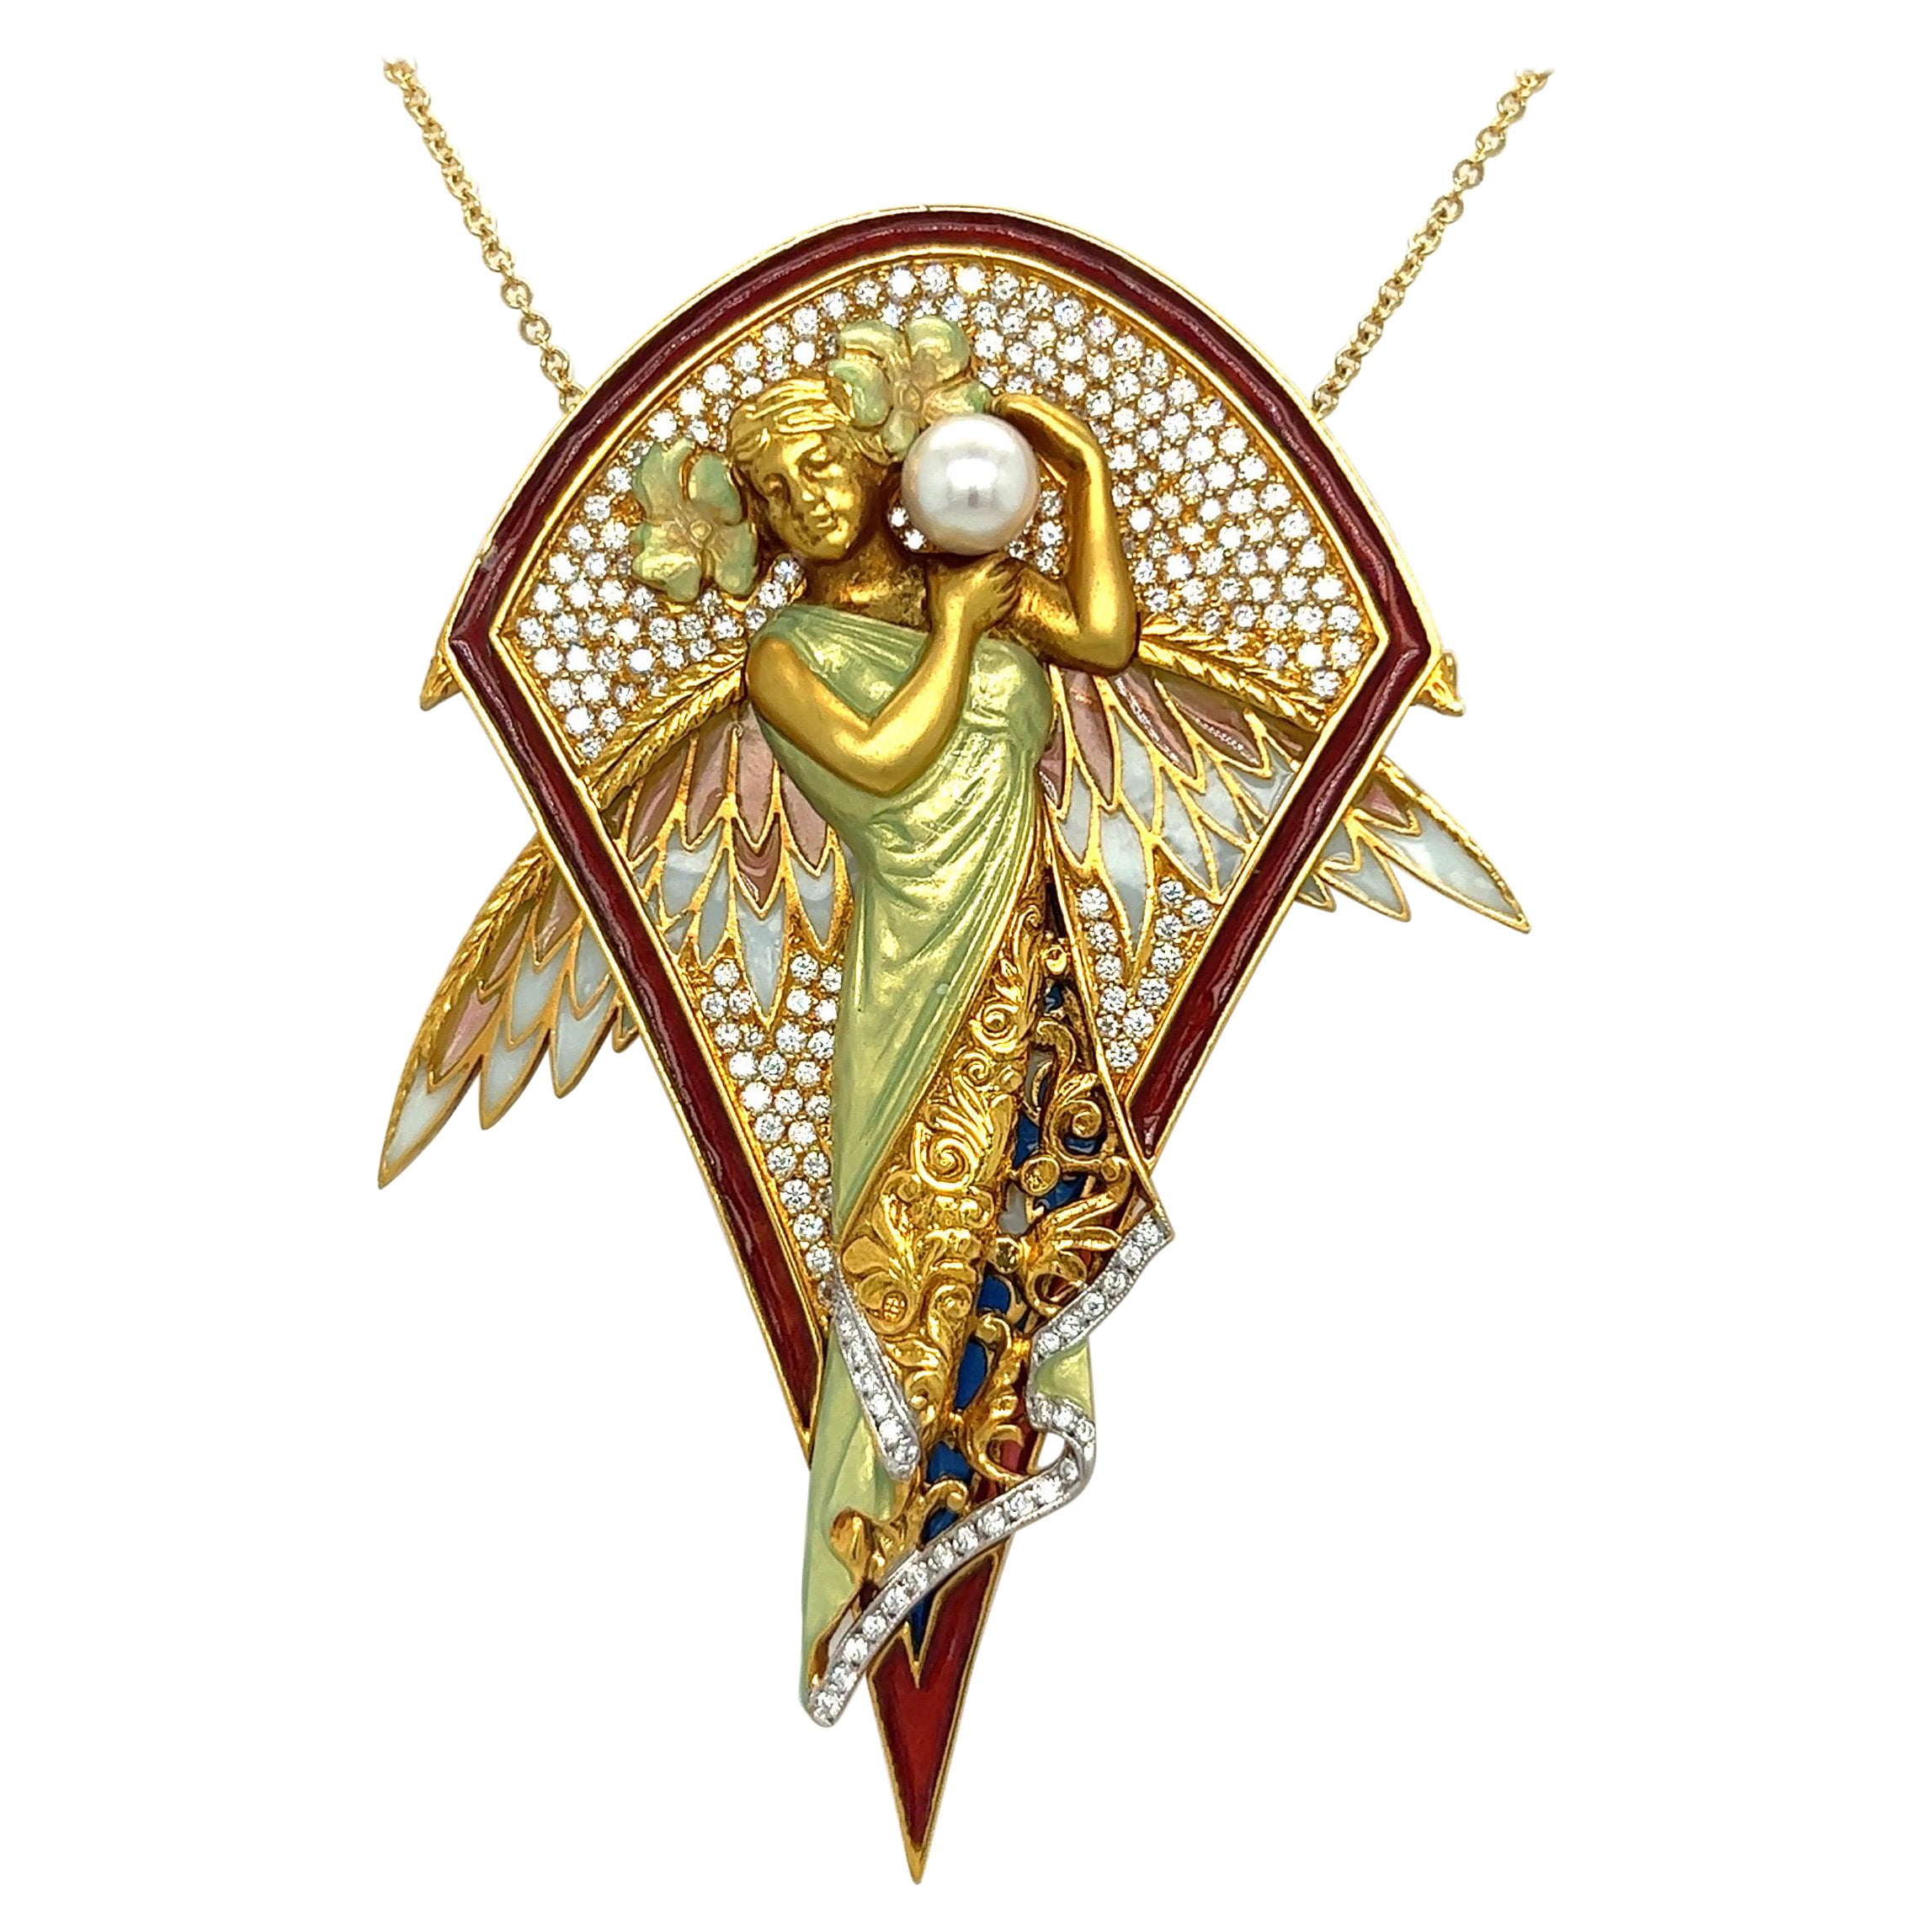 Masriera 18 KT YG Winged Nymph Brooch with Dia 1.94CT, Enamel and Pearls For Sale